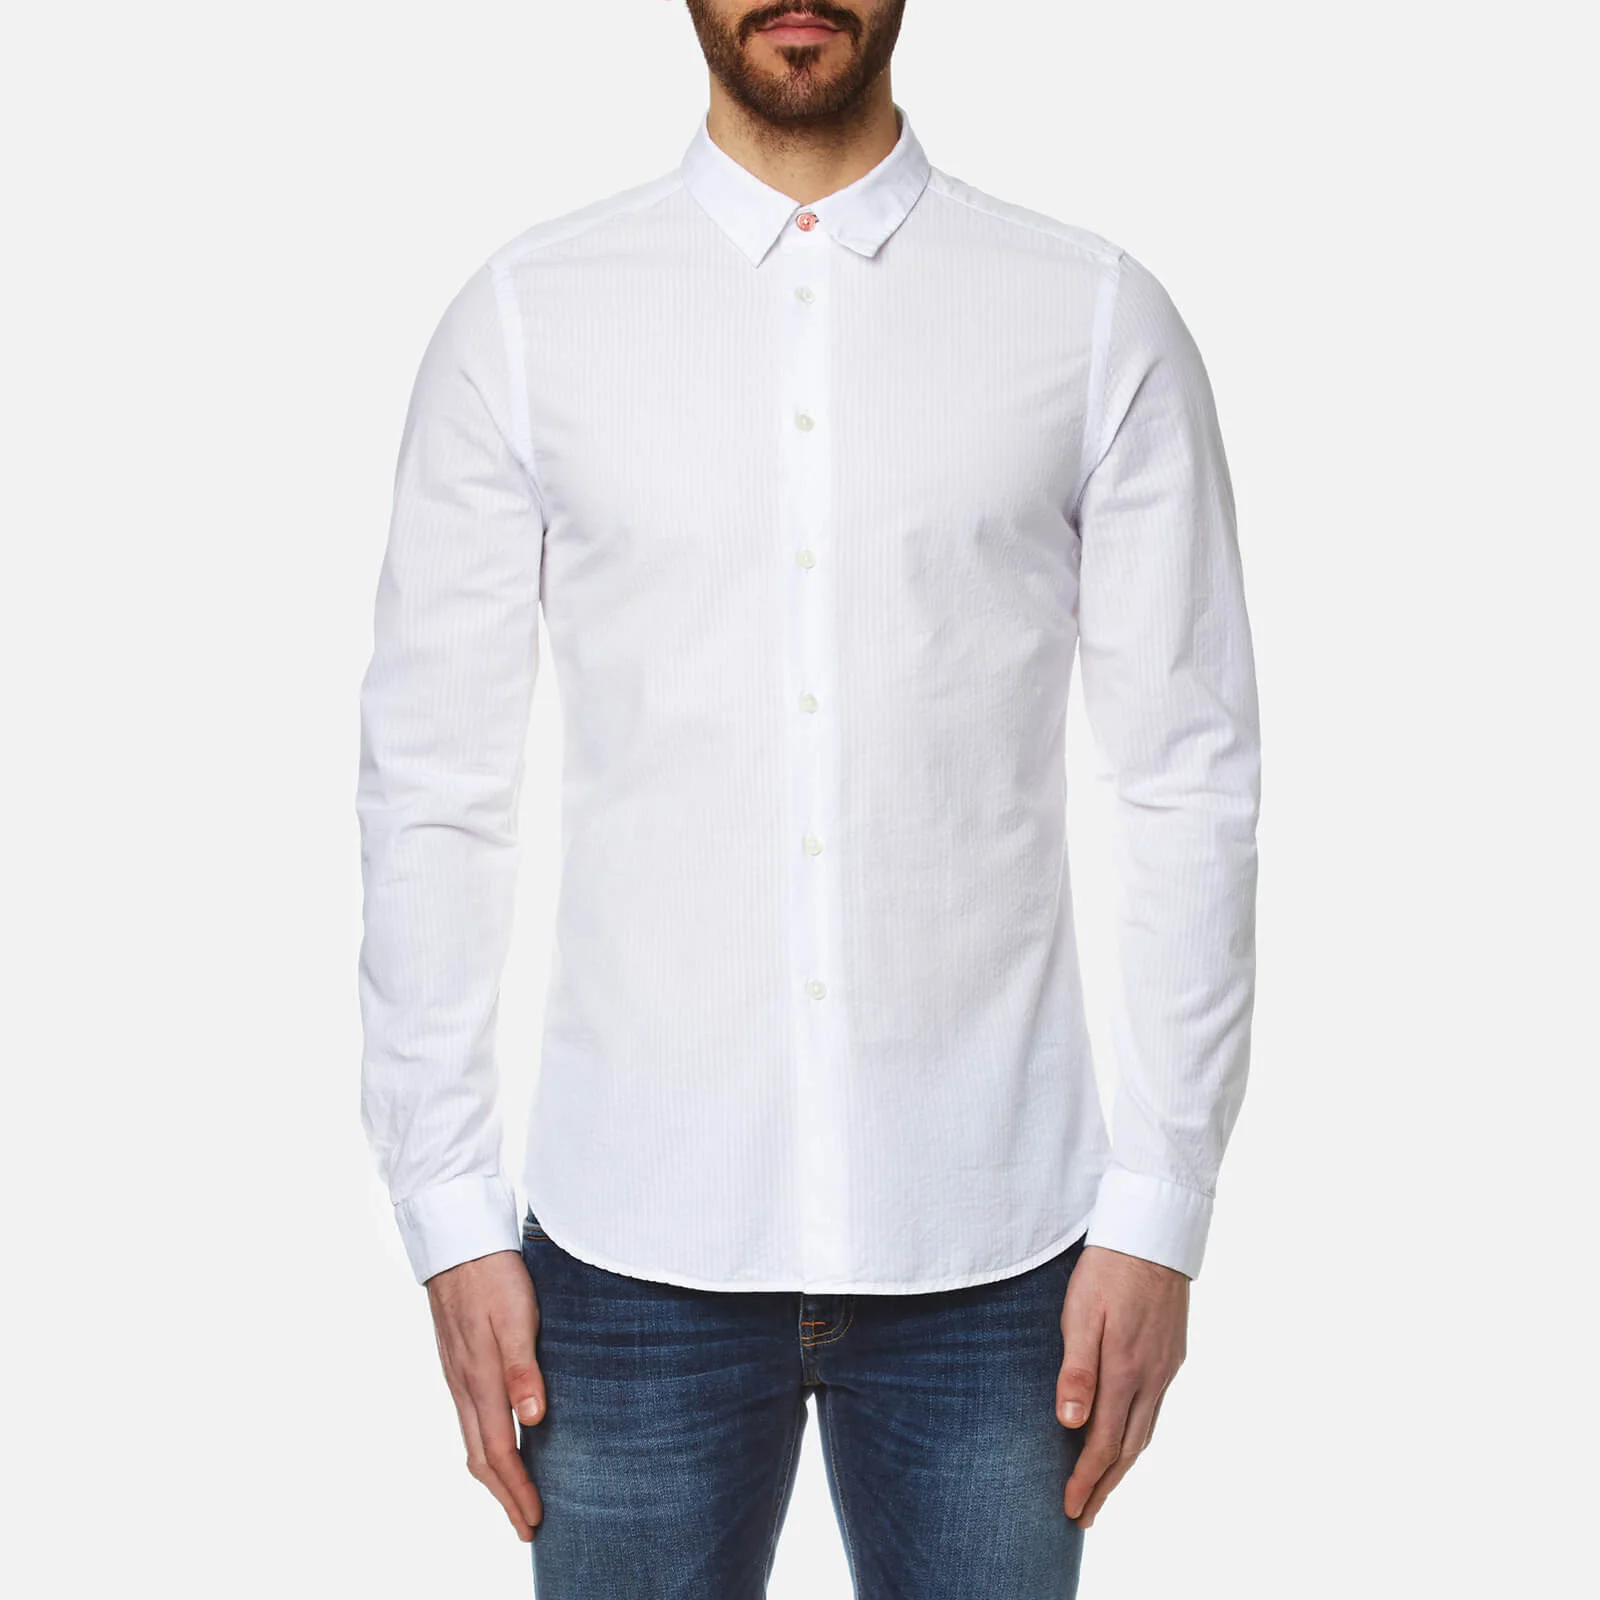 PS by Paul Smith Men's Long Sleeve Slim Fit Shirt - White Image 1